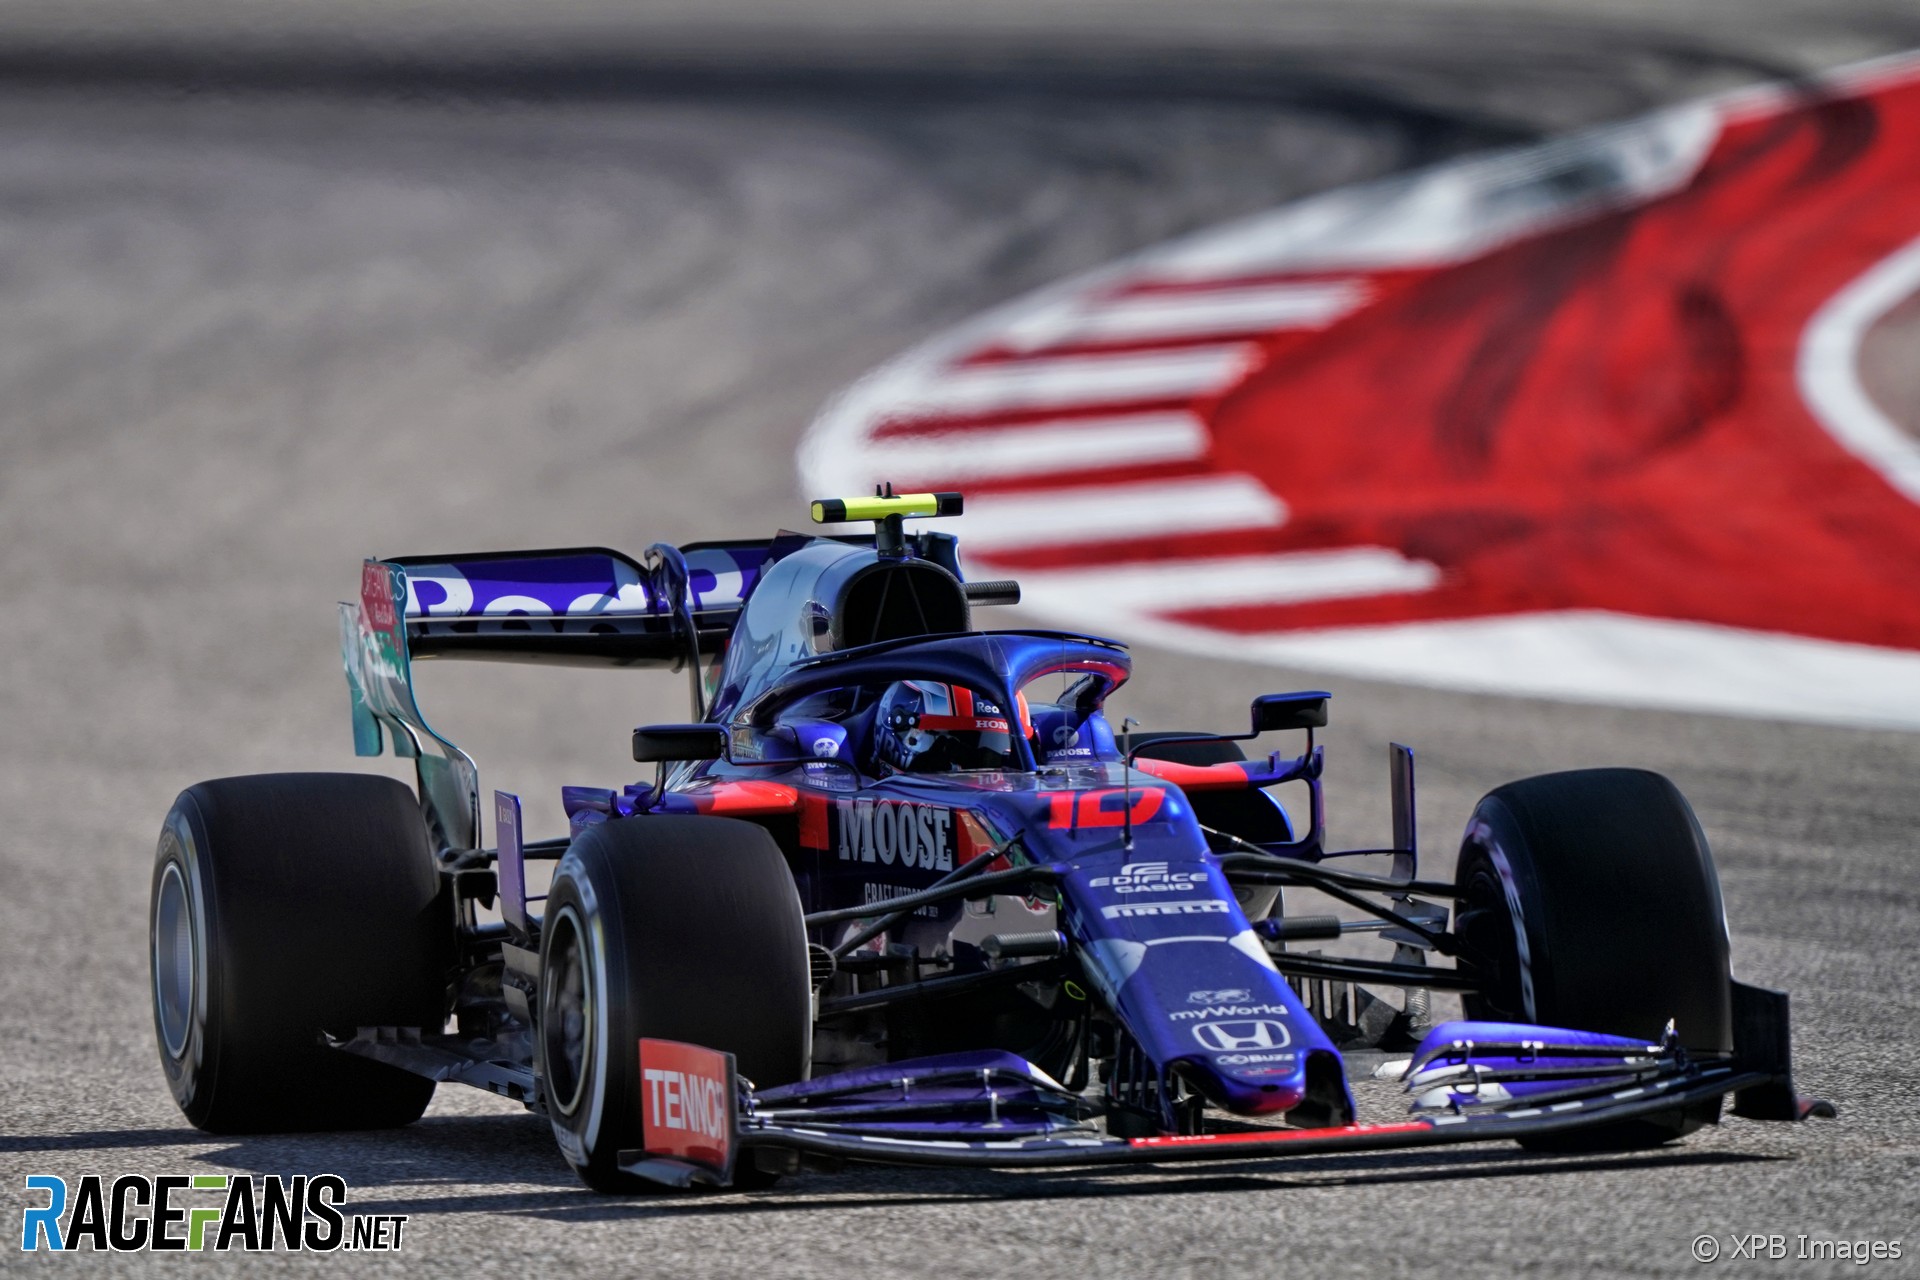 Pierre Gasly, Toro Rosso, Circuit of the Americas, 2019